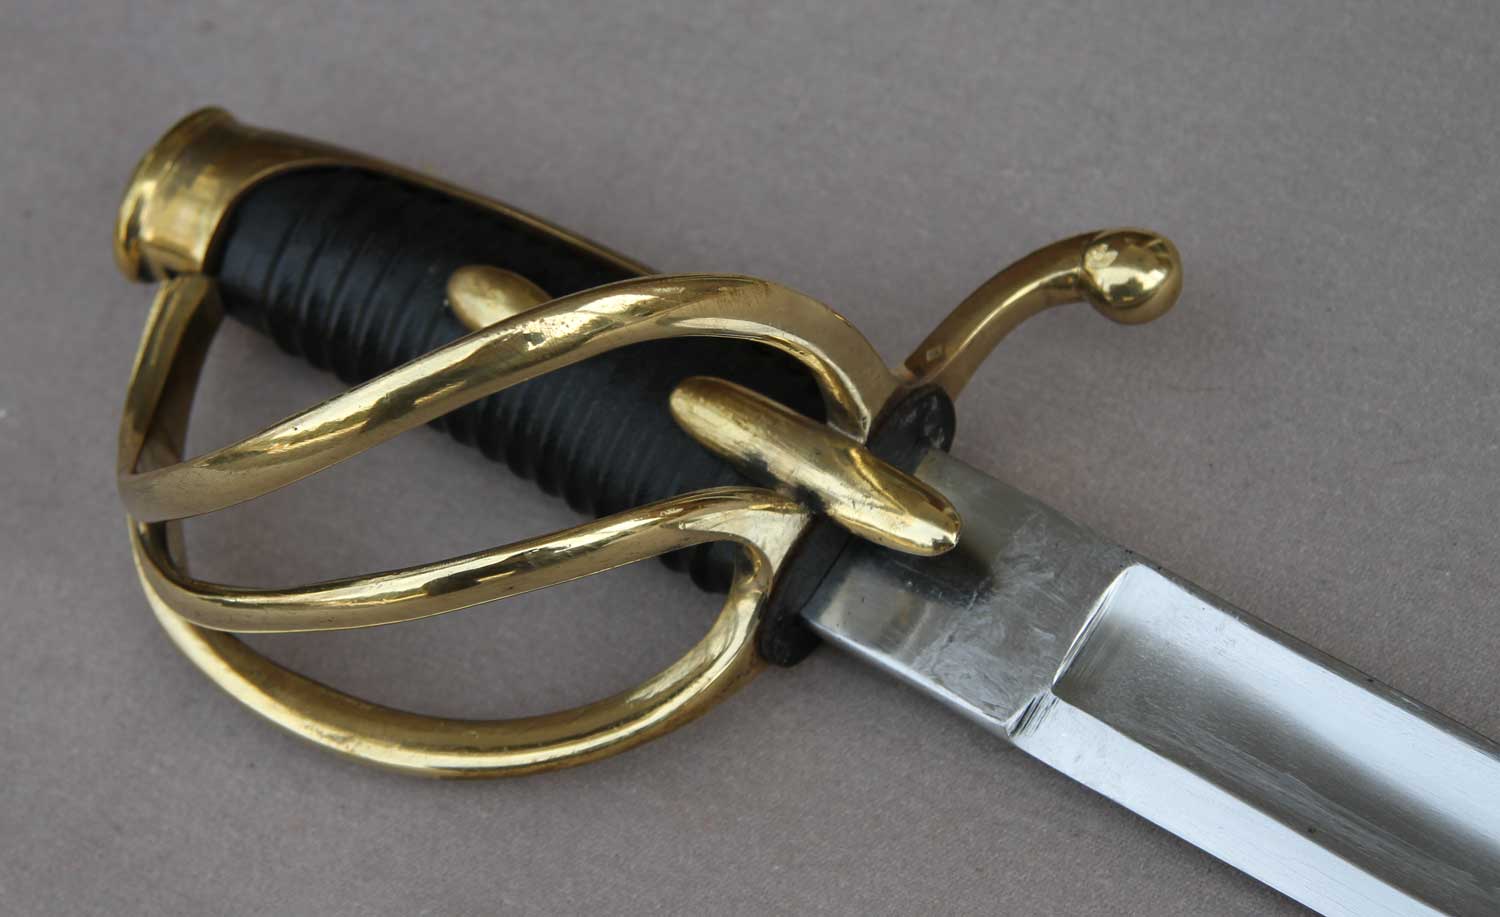 French, Light Cavalry Sabre